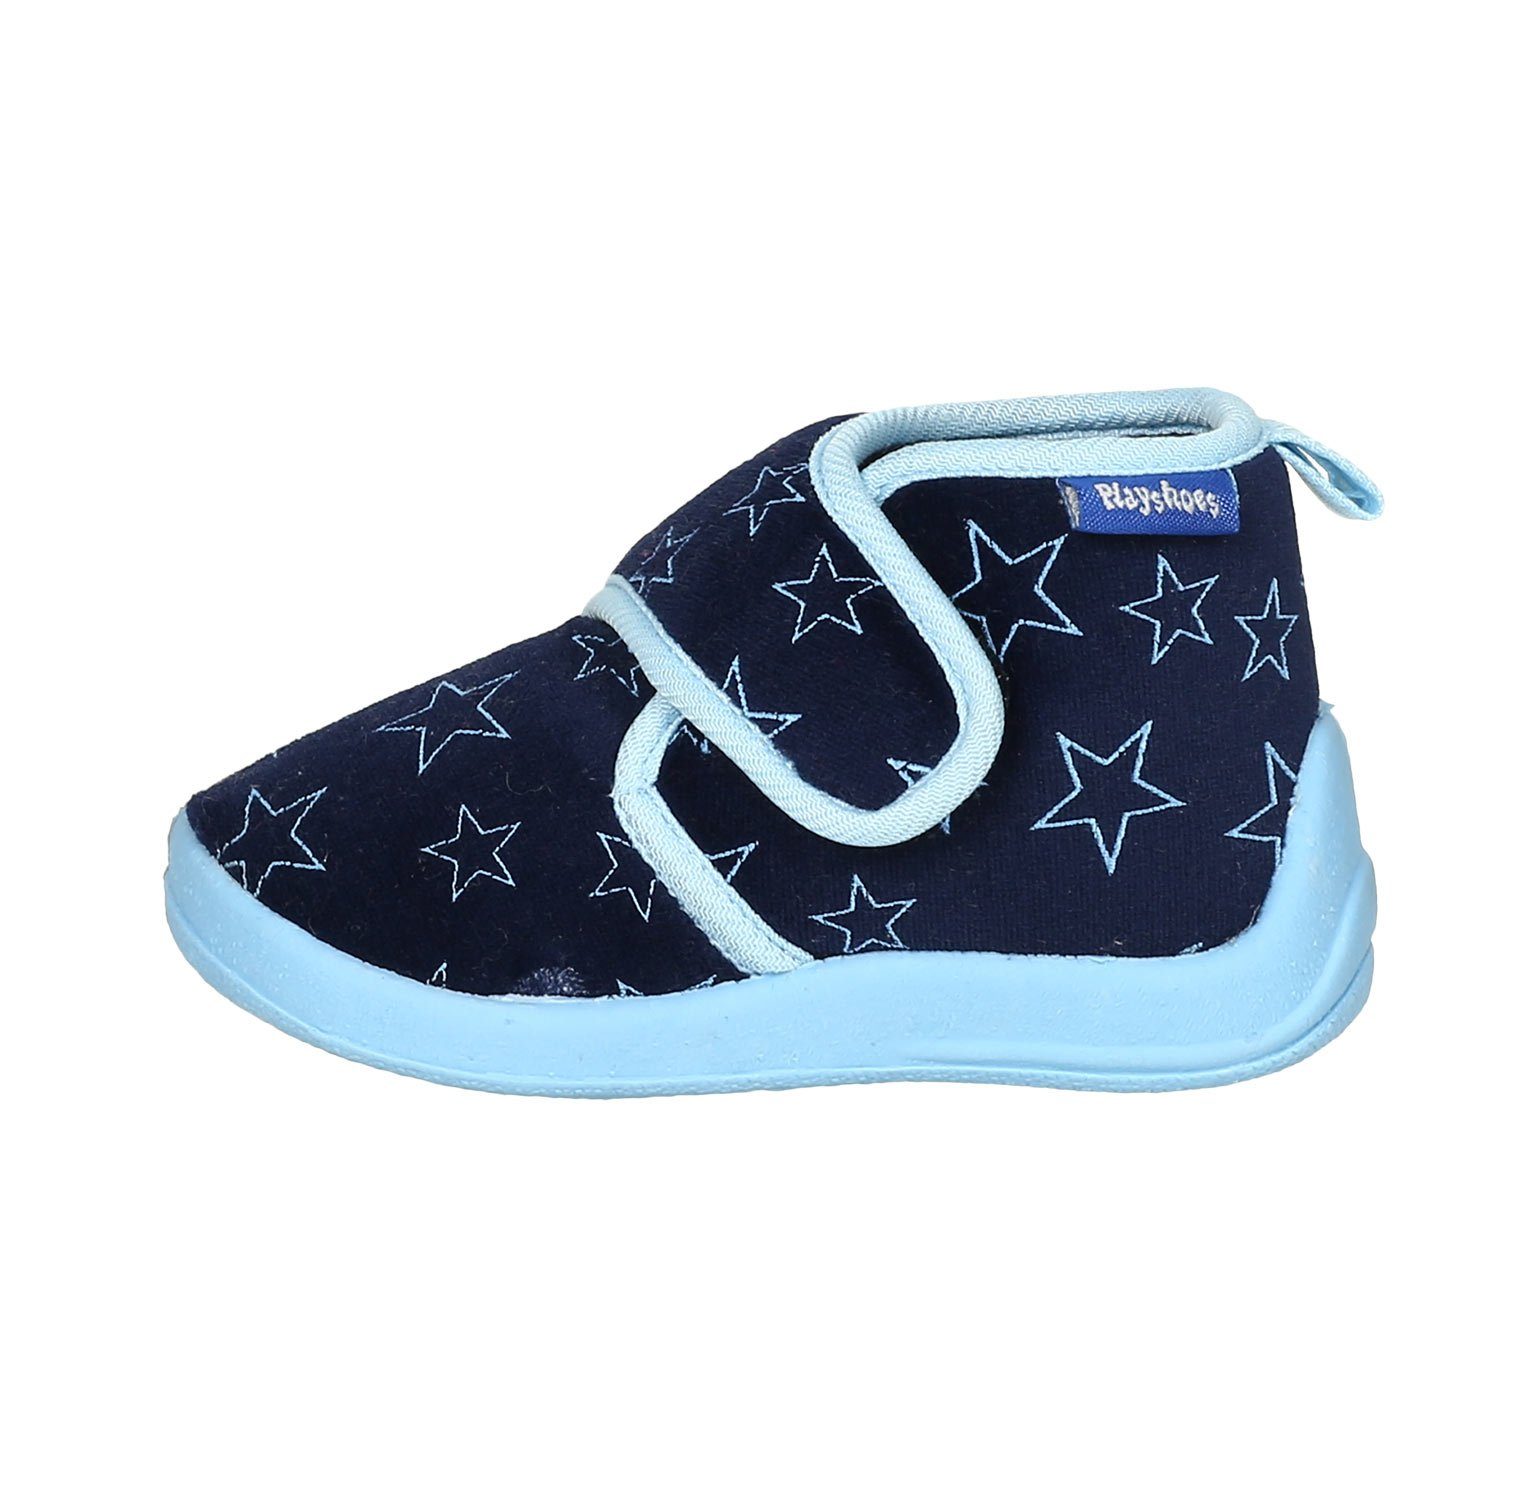 Playshoes Pastell Hausschuh Hausschuh Marine